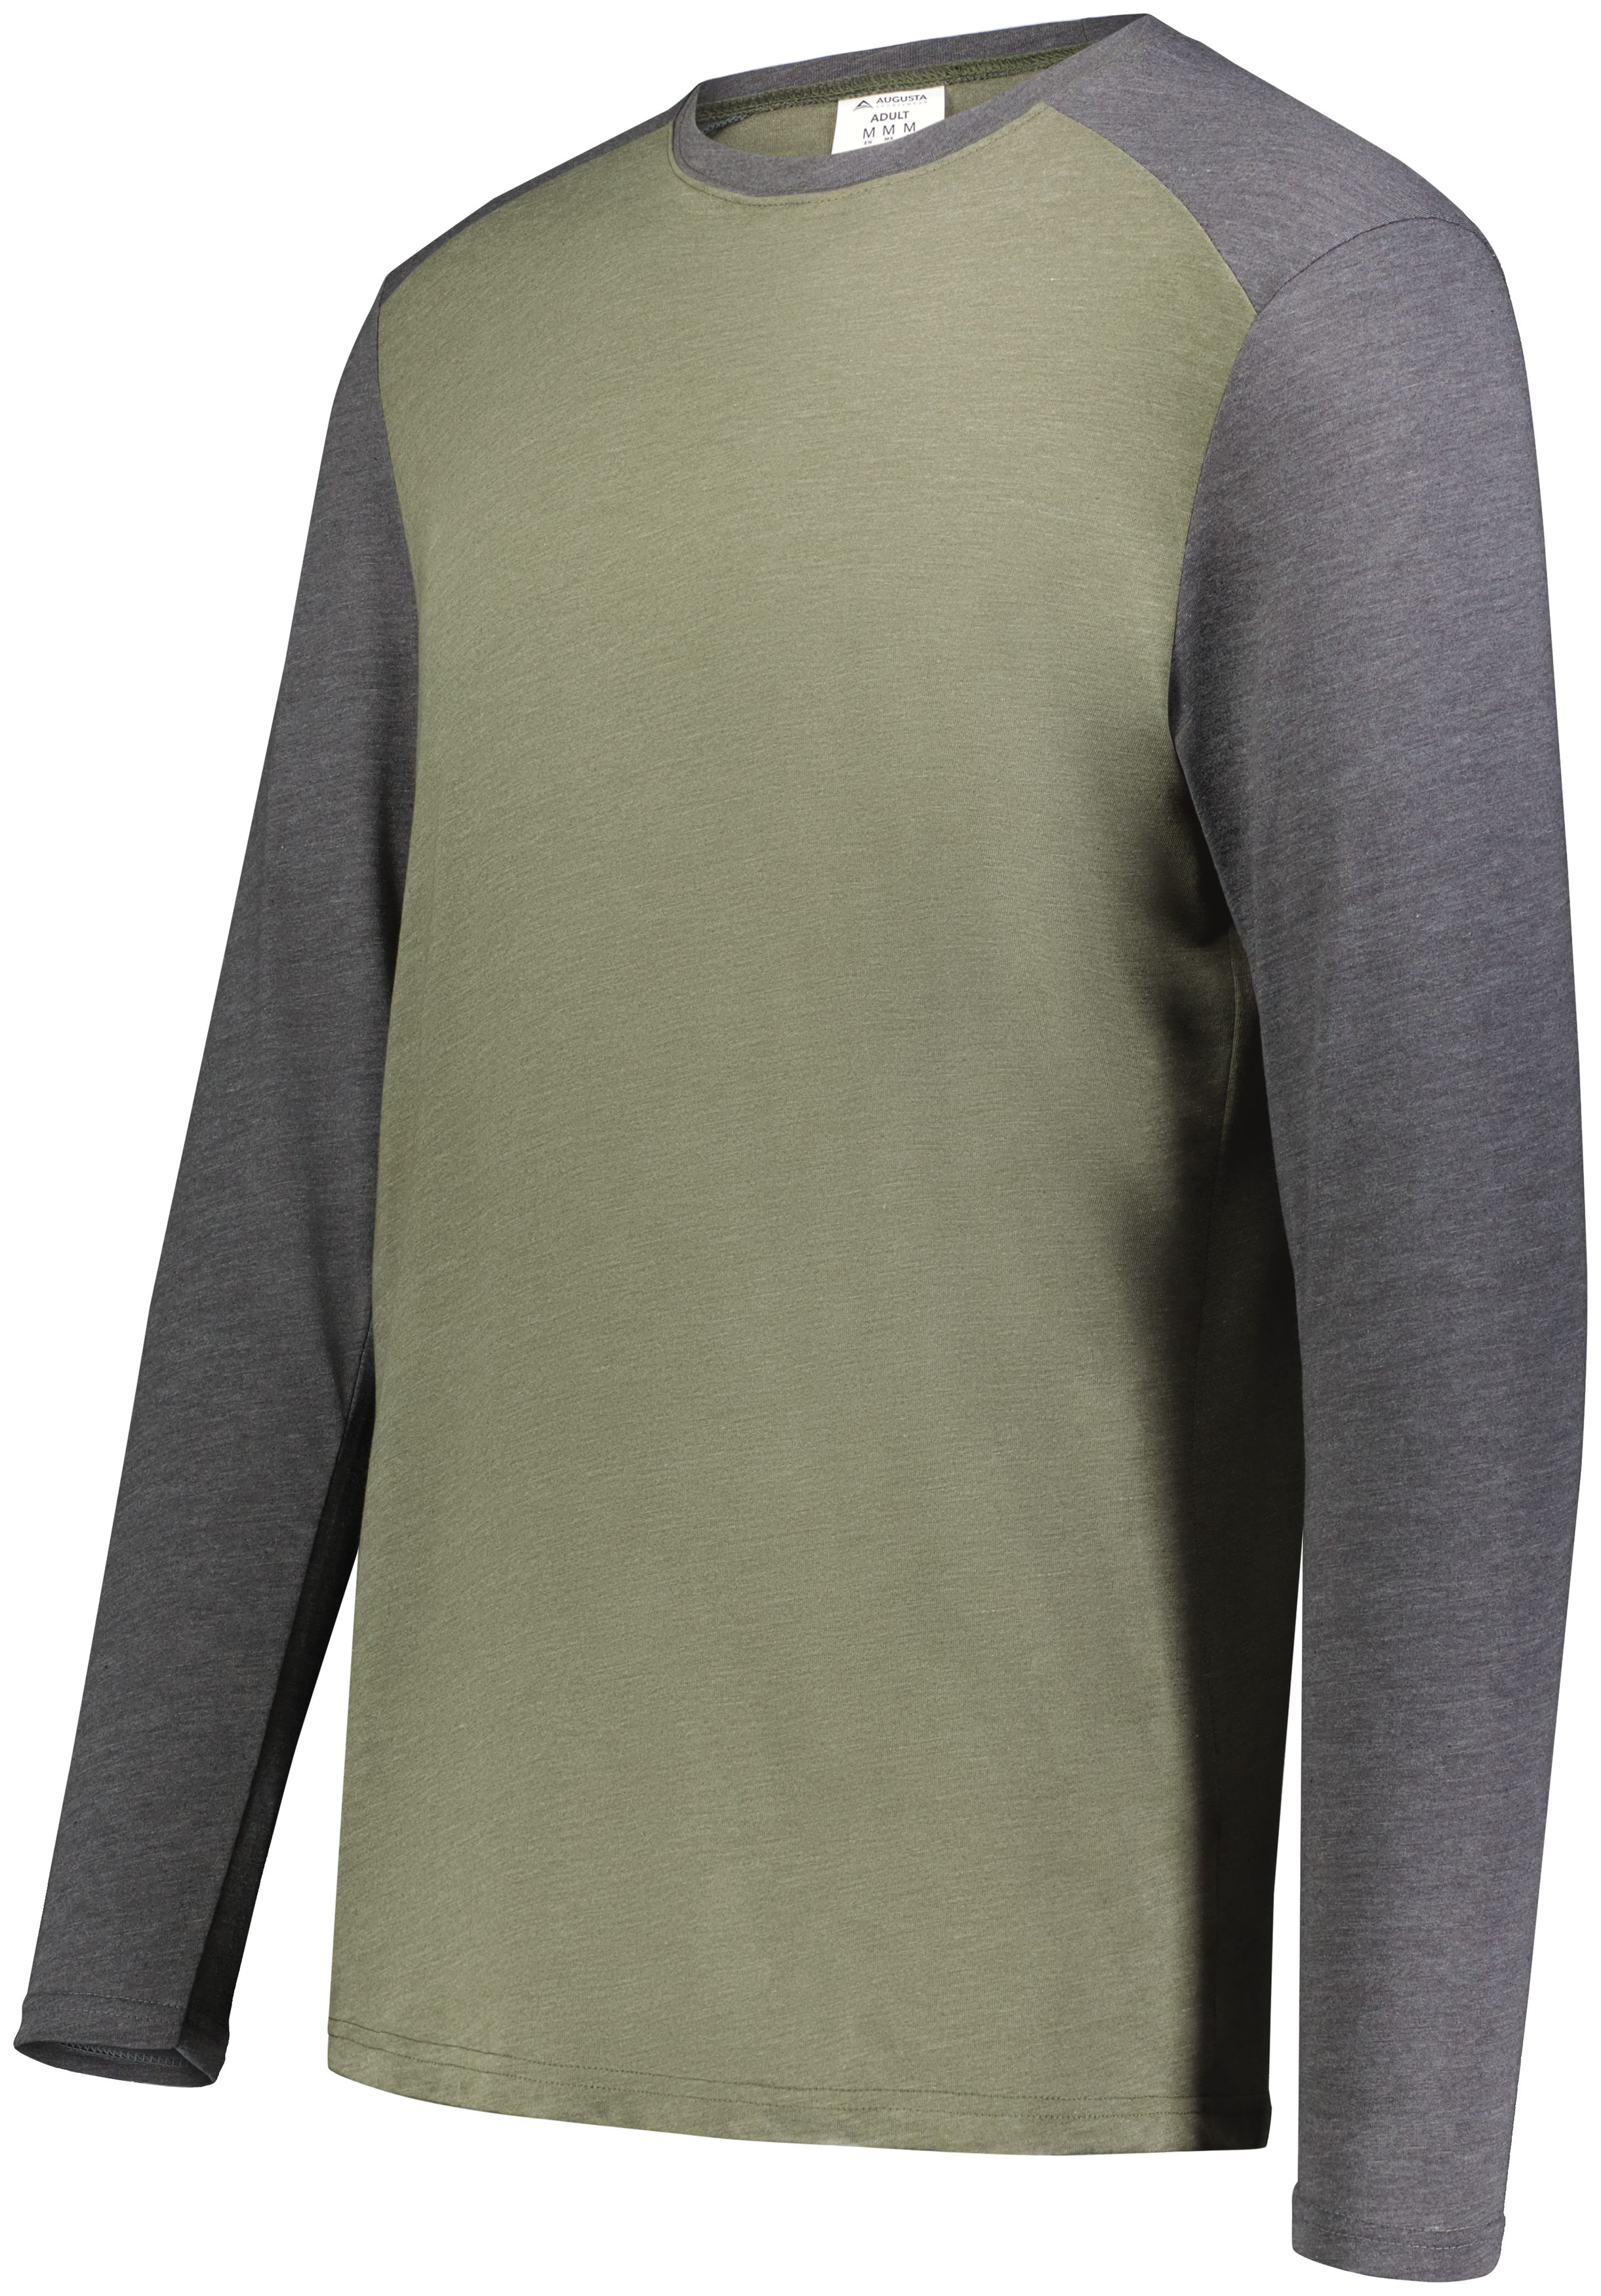 click to view Olive Heather/Carbon Heather